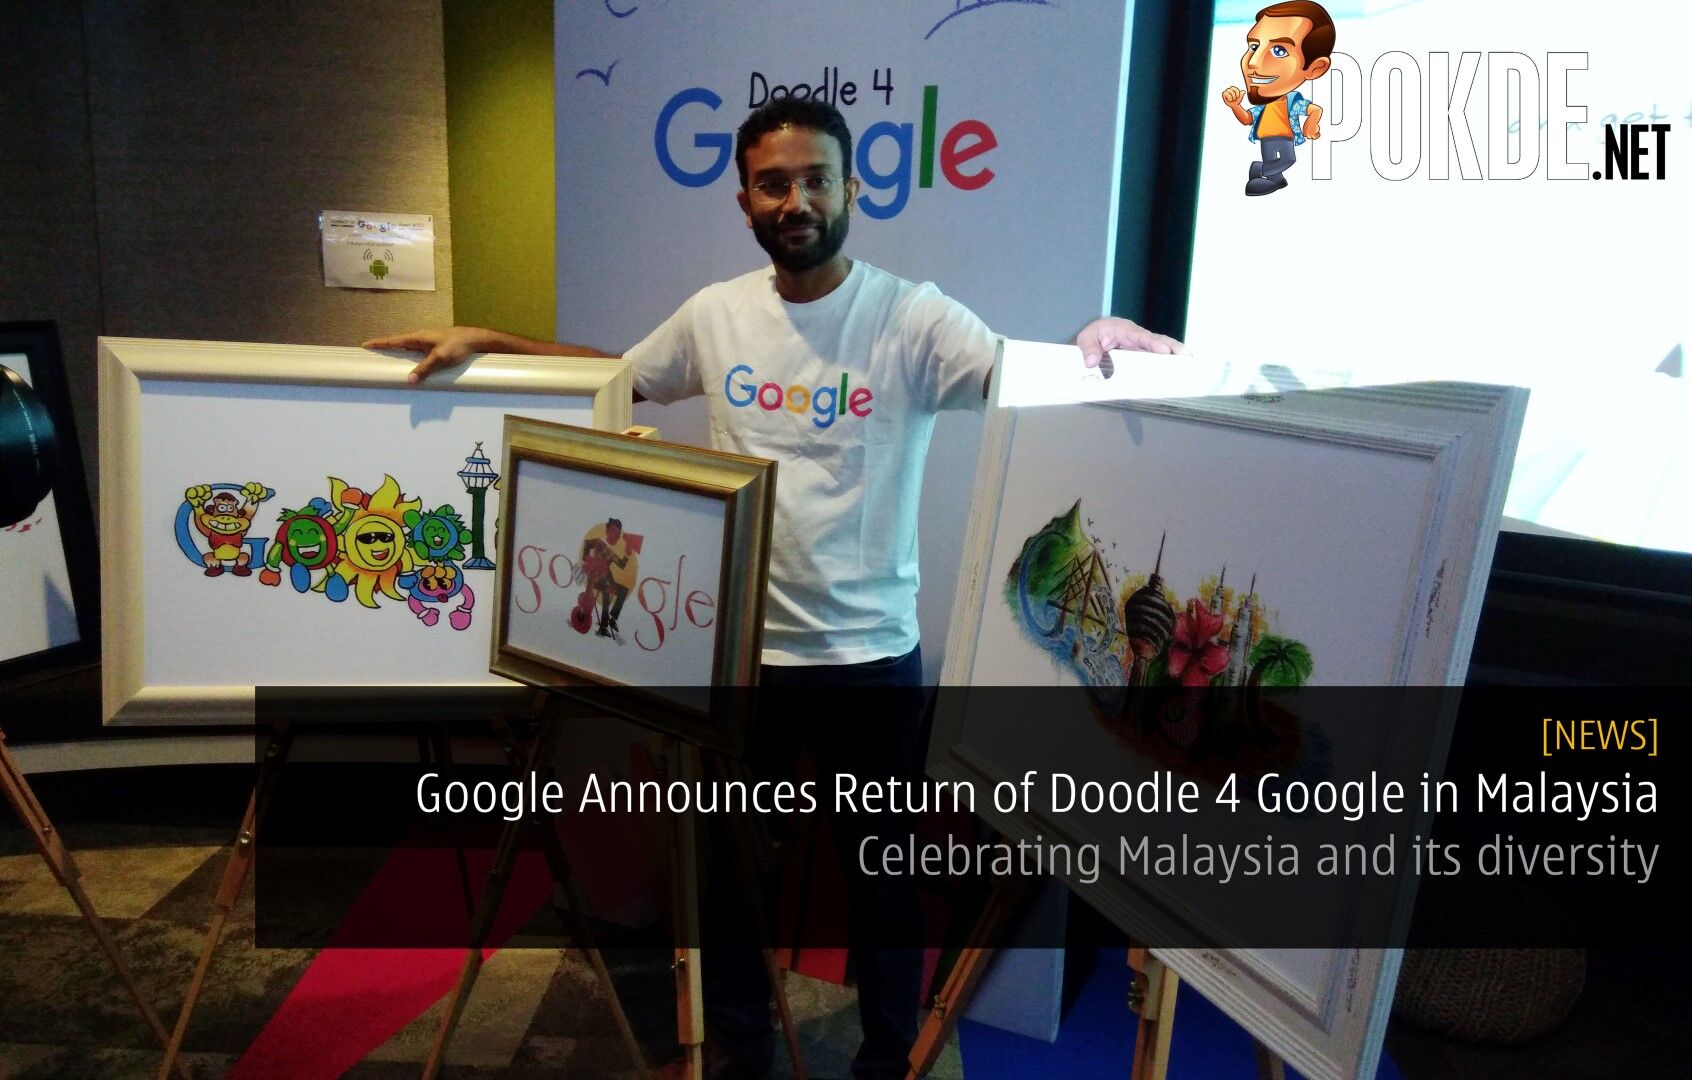 Google Announces Return of Doodle 4 Google in Malaysia - Celebrating Malaysia and its diversity 18